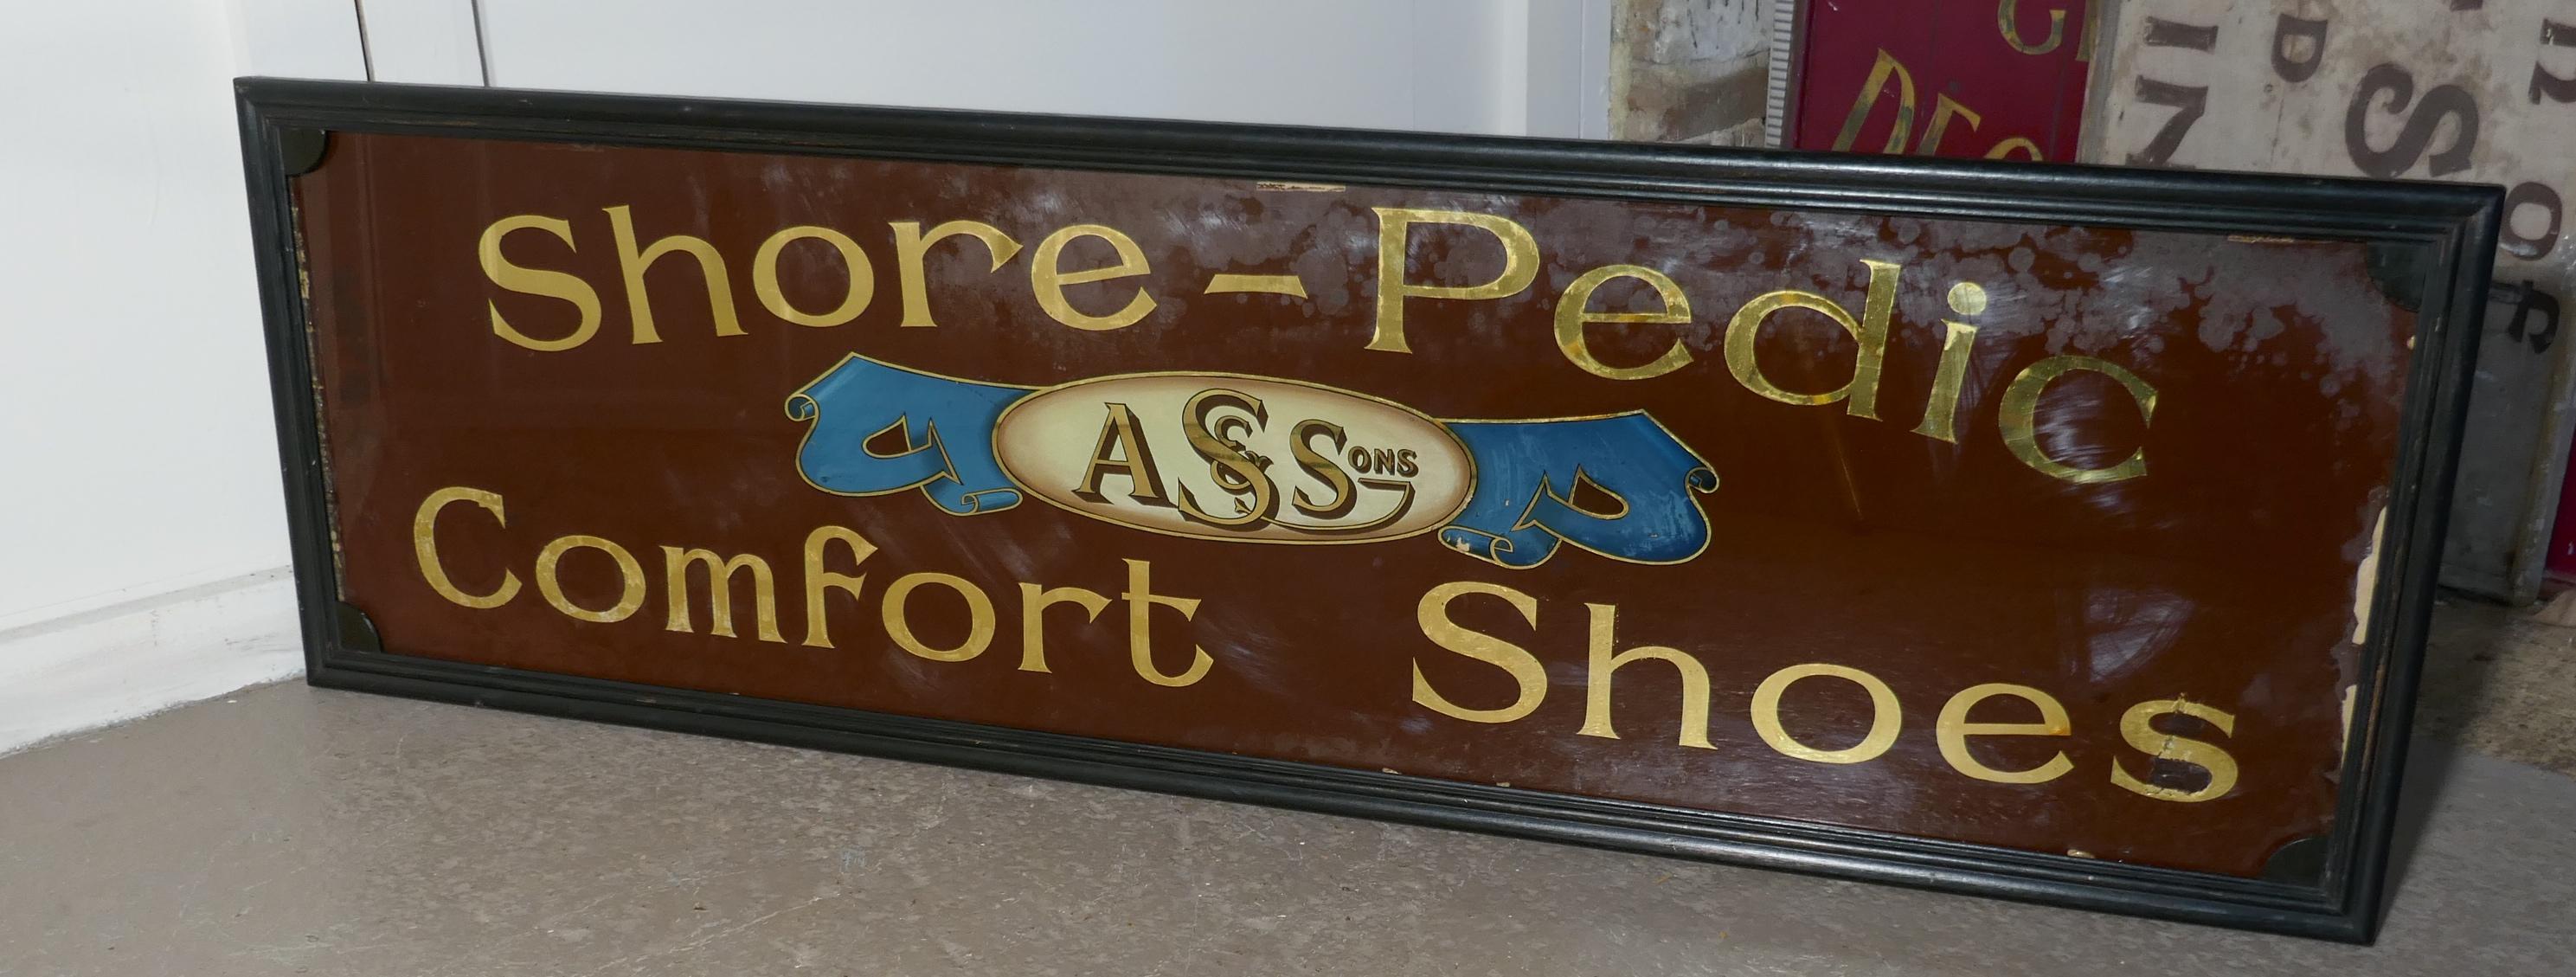 Shoe Shop Mirror Advertising Sign, A S & Sons Shore Pedic Shoes For Sale 1